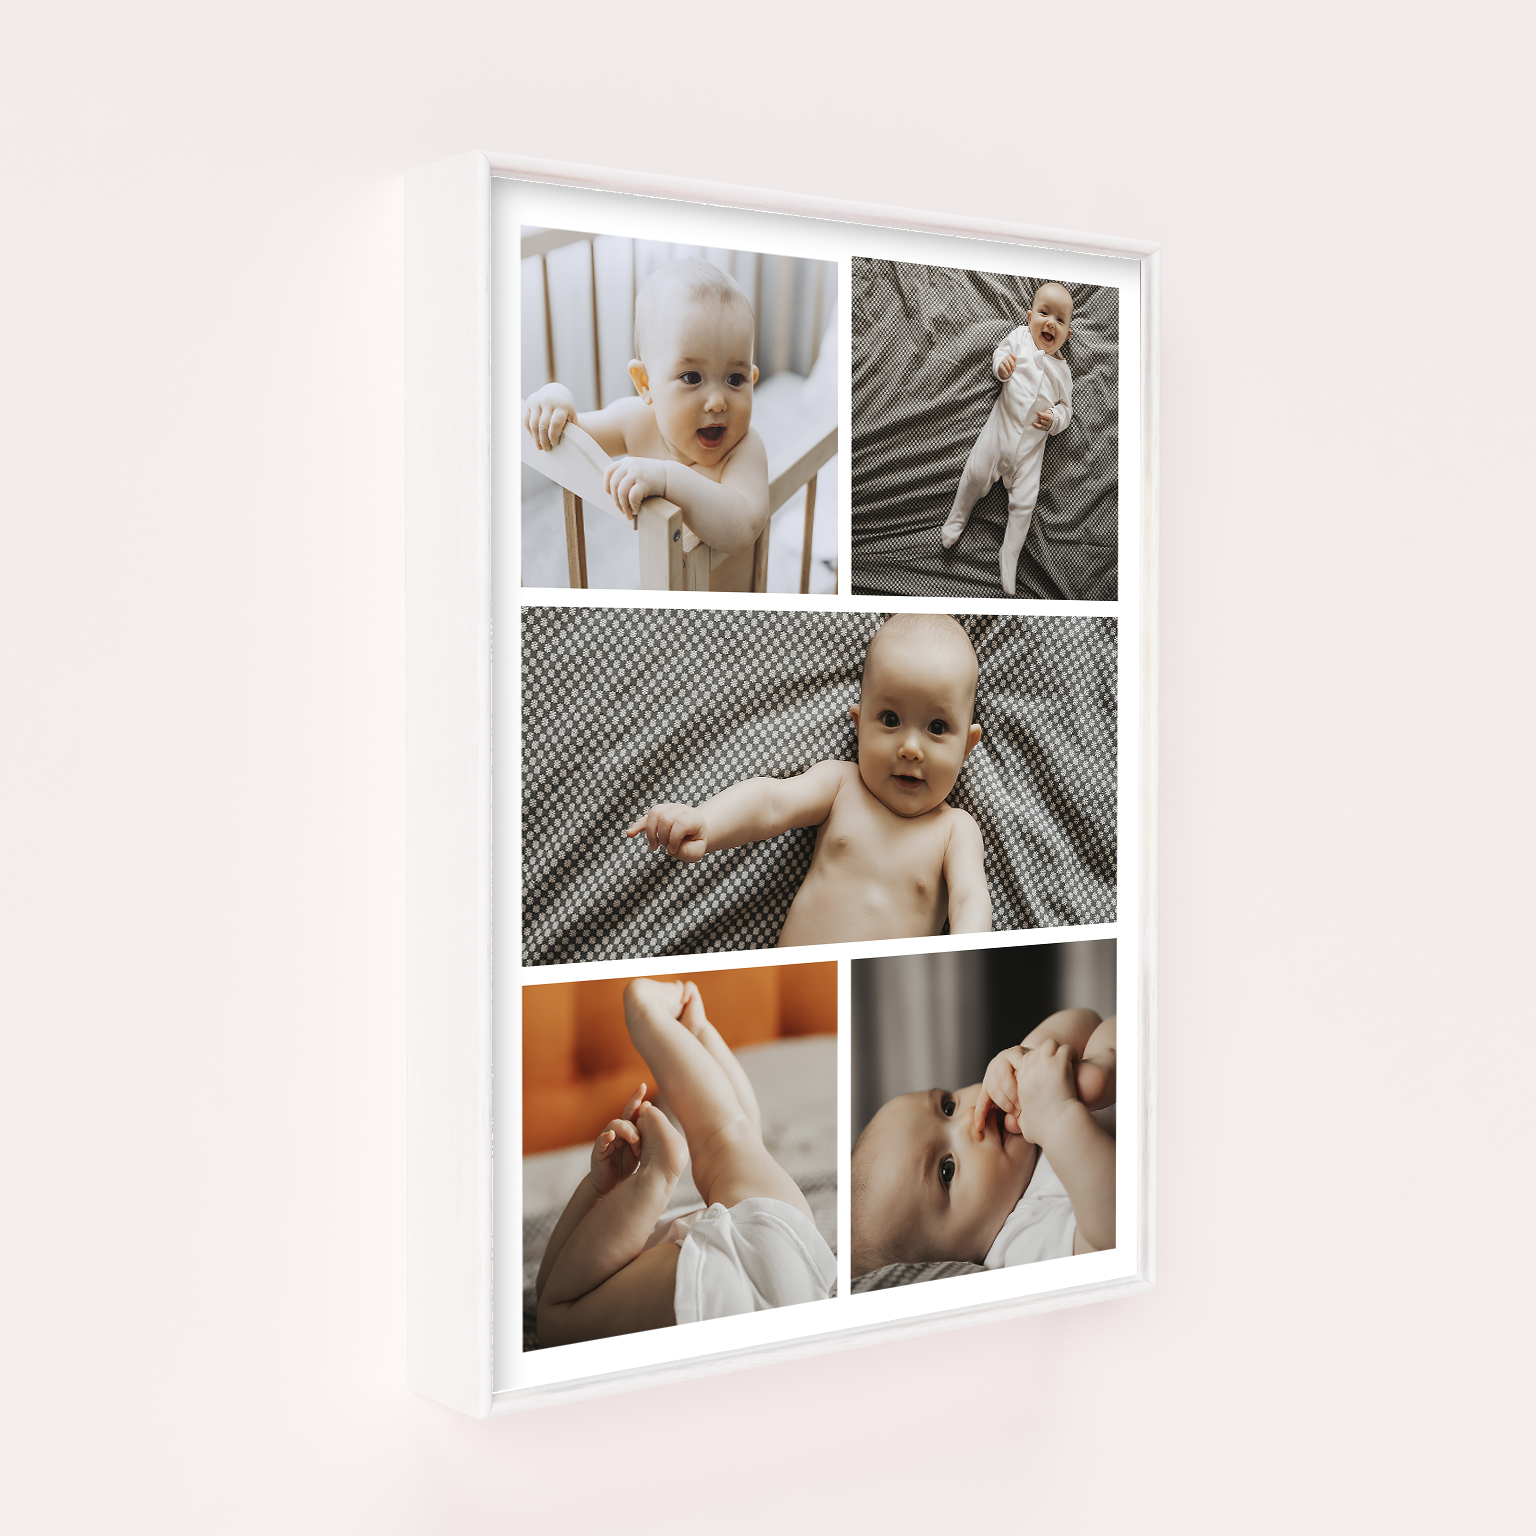 Wall Art Framed Print - Childhood Kaleidoscope - Capture the magic of childhood with this portrait-oriented canvas, accommodating up to 5 photos in a beautiful collage.